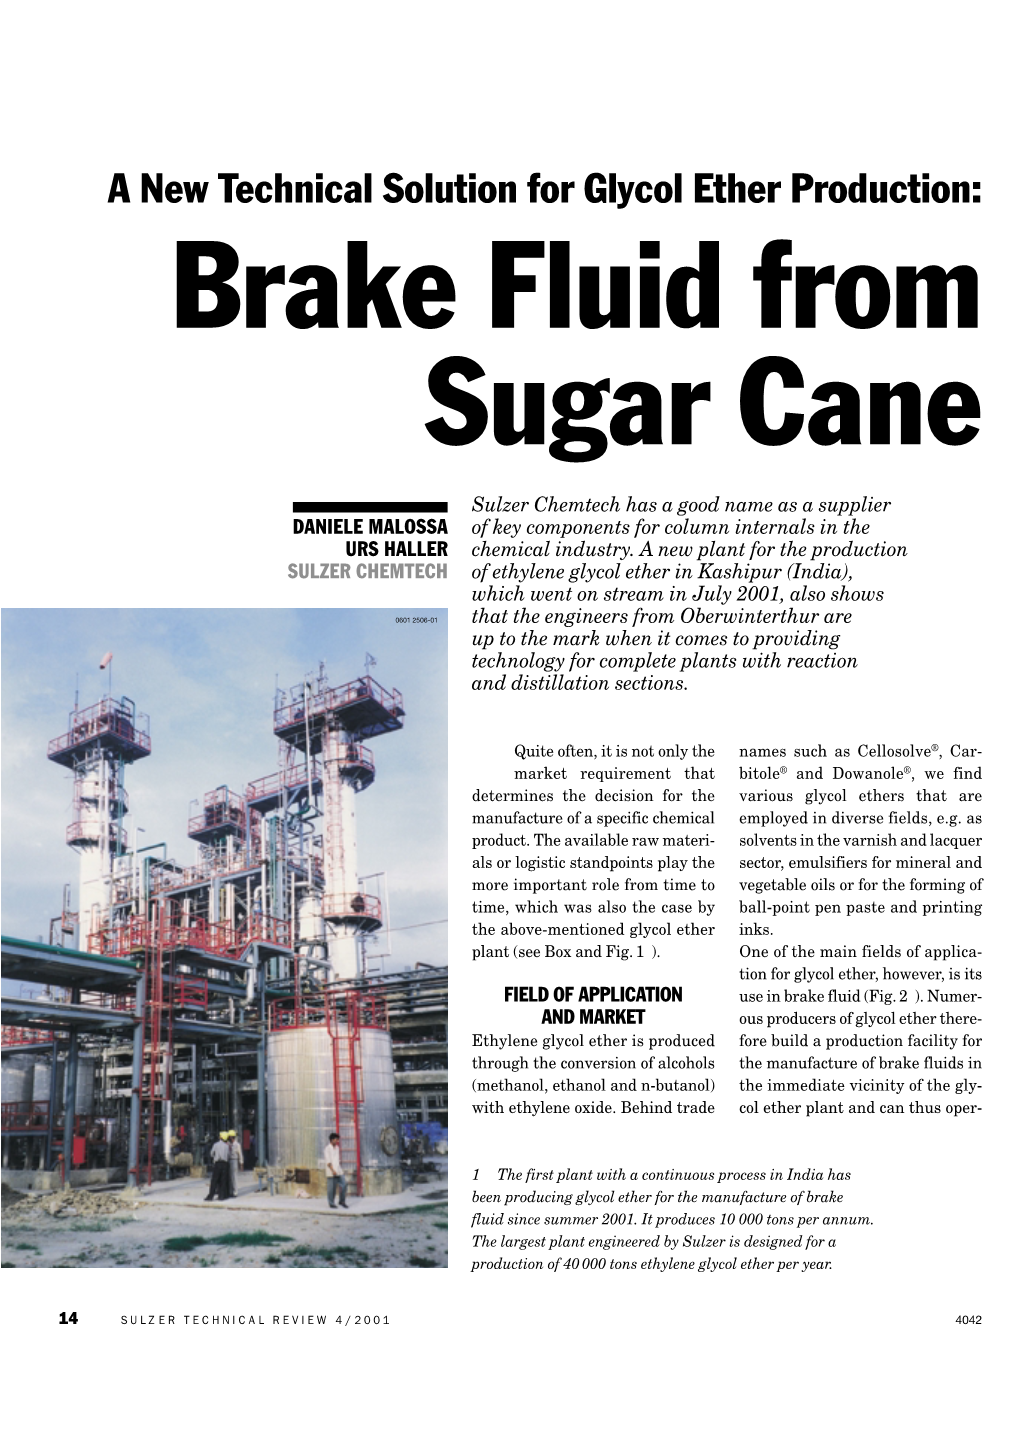 A New Technical Solution for Glycol Ether Production: Brake Fluid from Sugar Cane